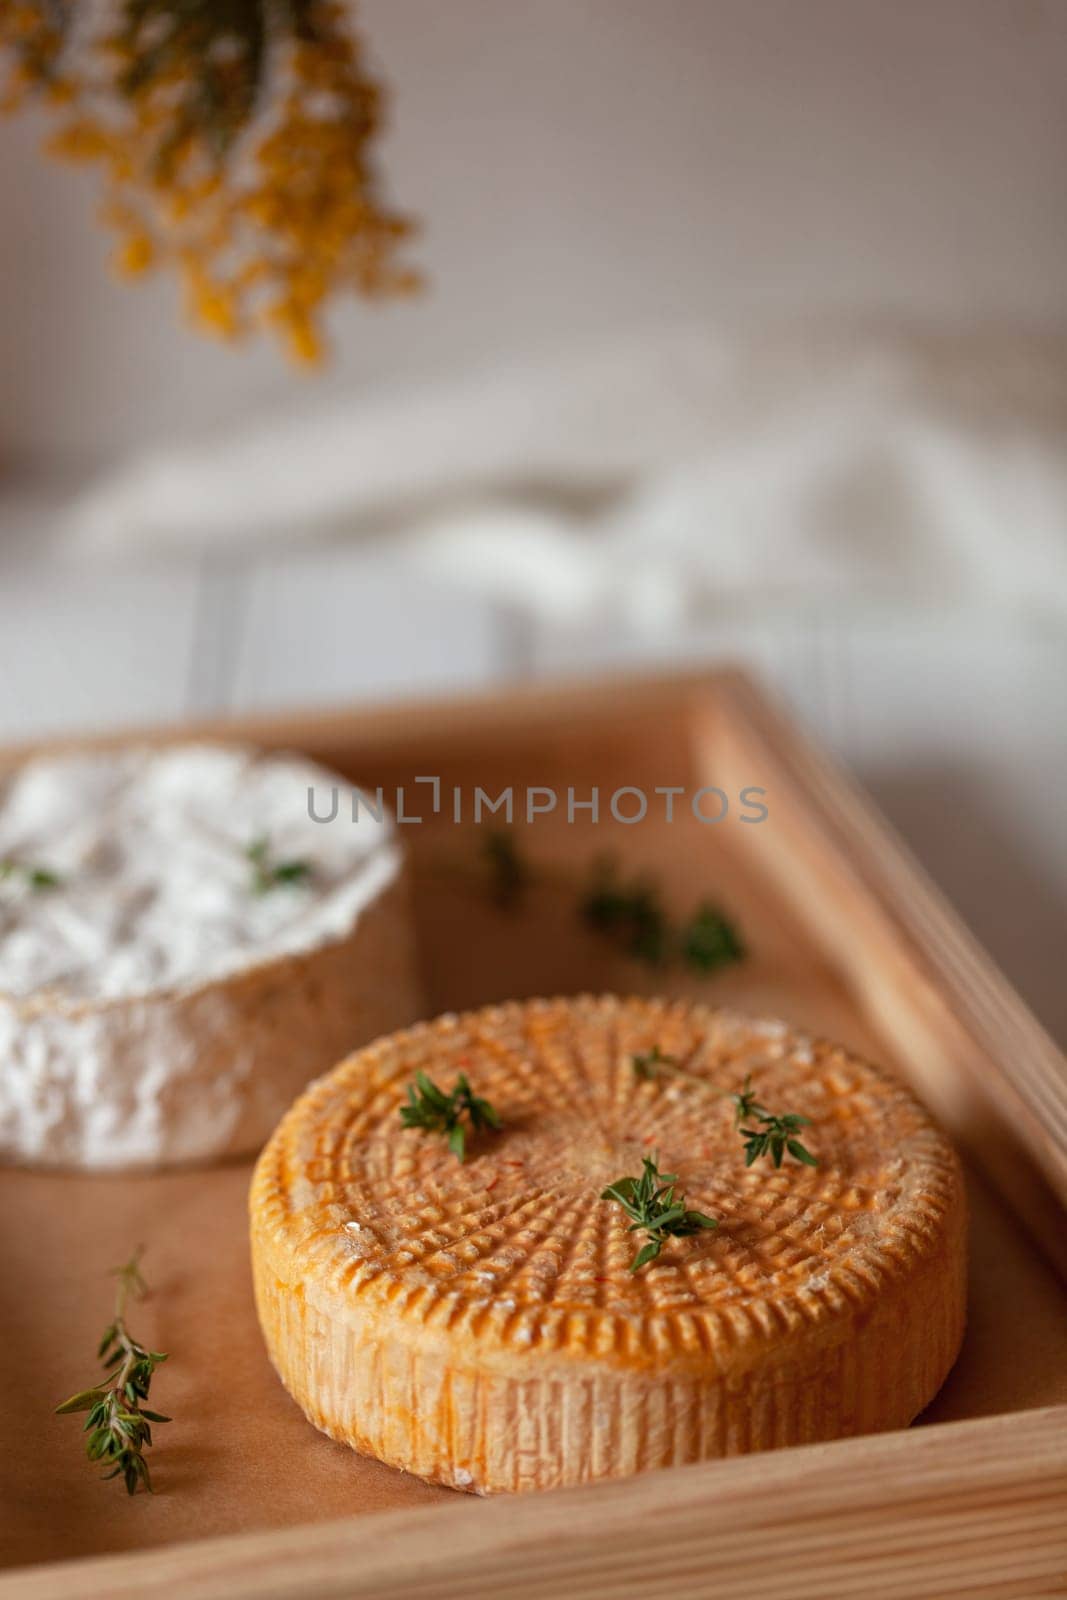 Two cheese types decorated with thyme branches served on a wooden tray by lanych